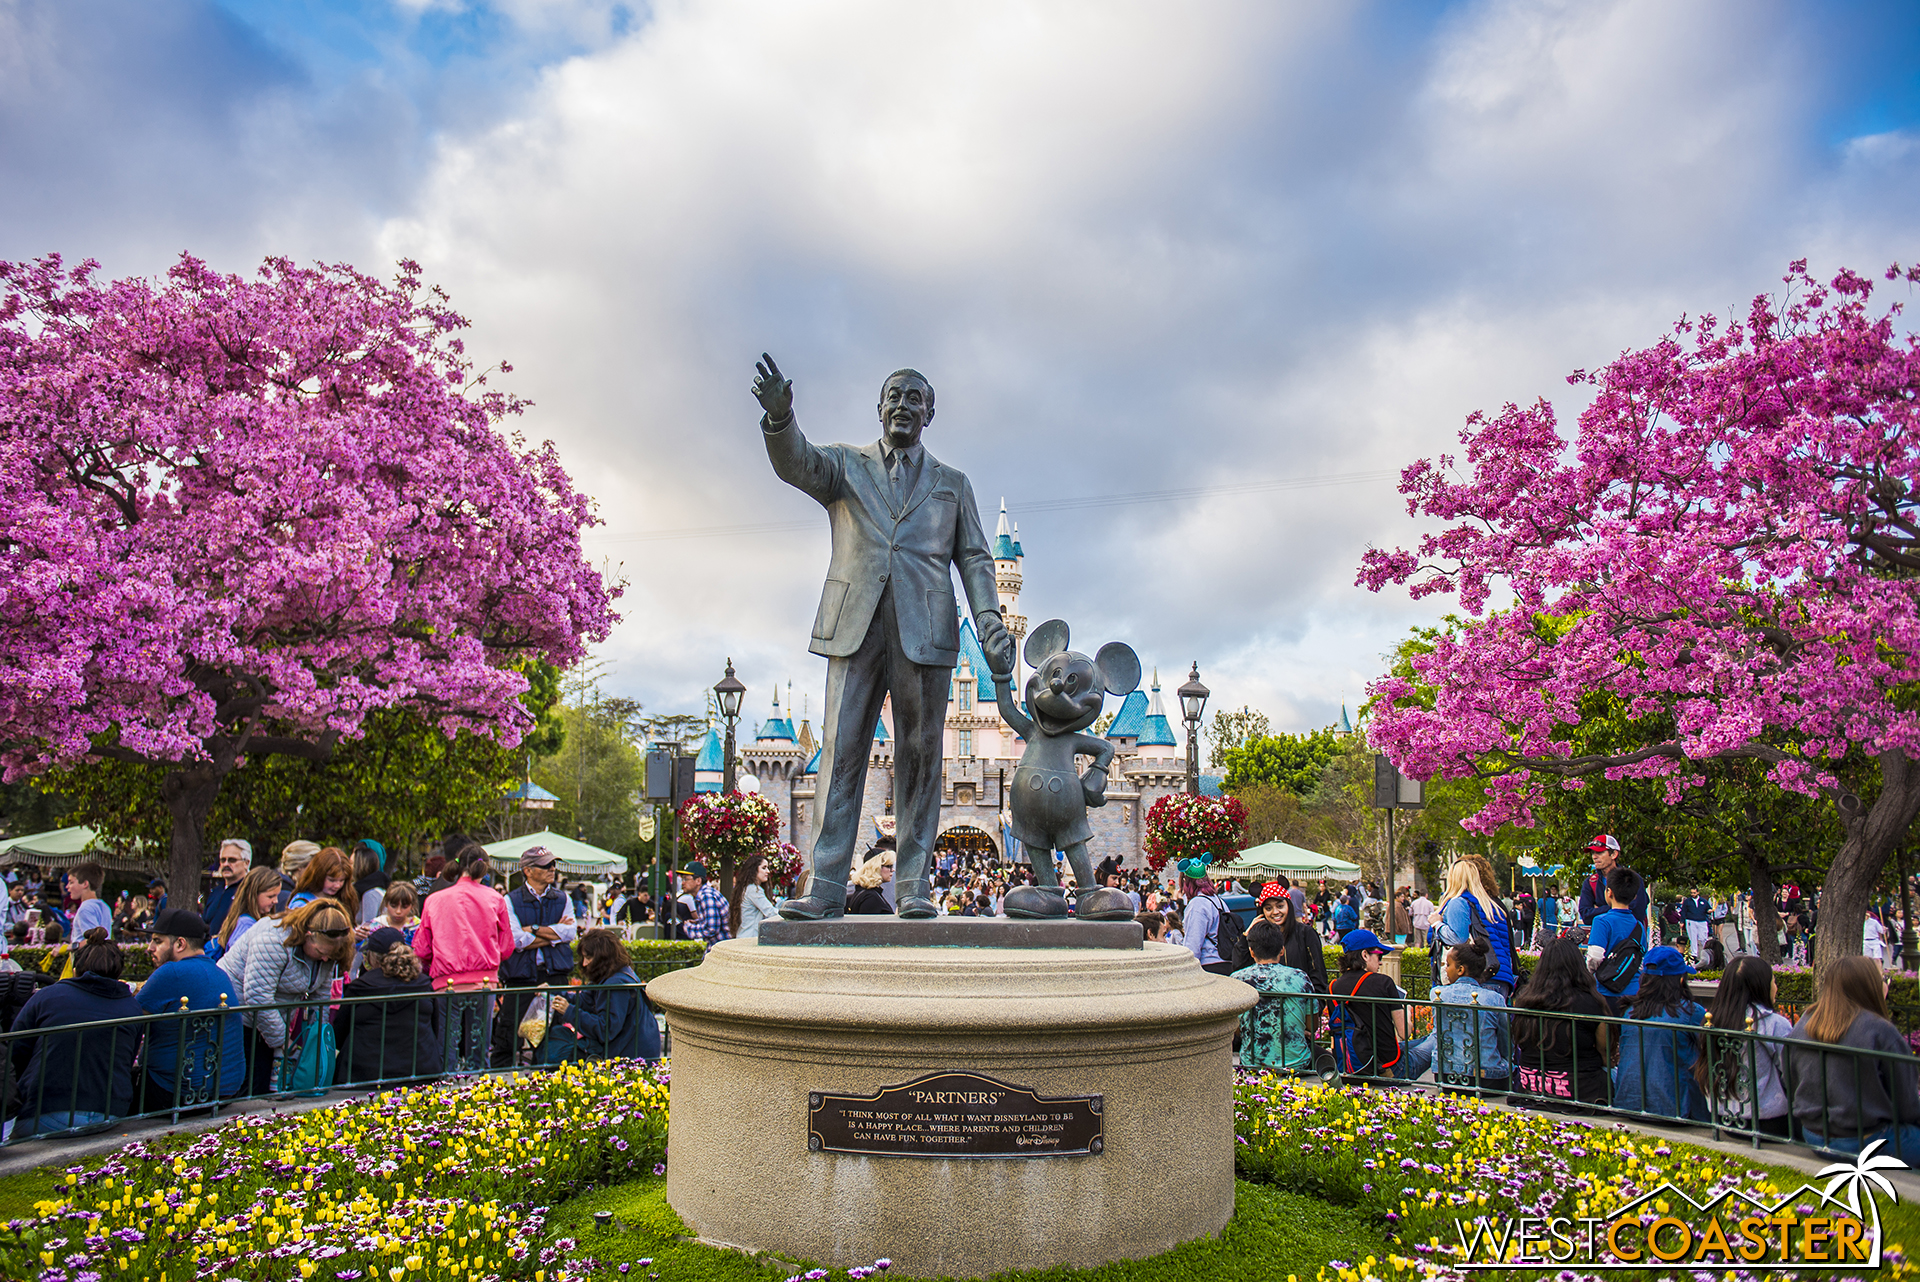  Of course, the most picturesque and heavily photographed area happens to be The Hub at Disneyland Park. 